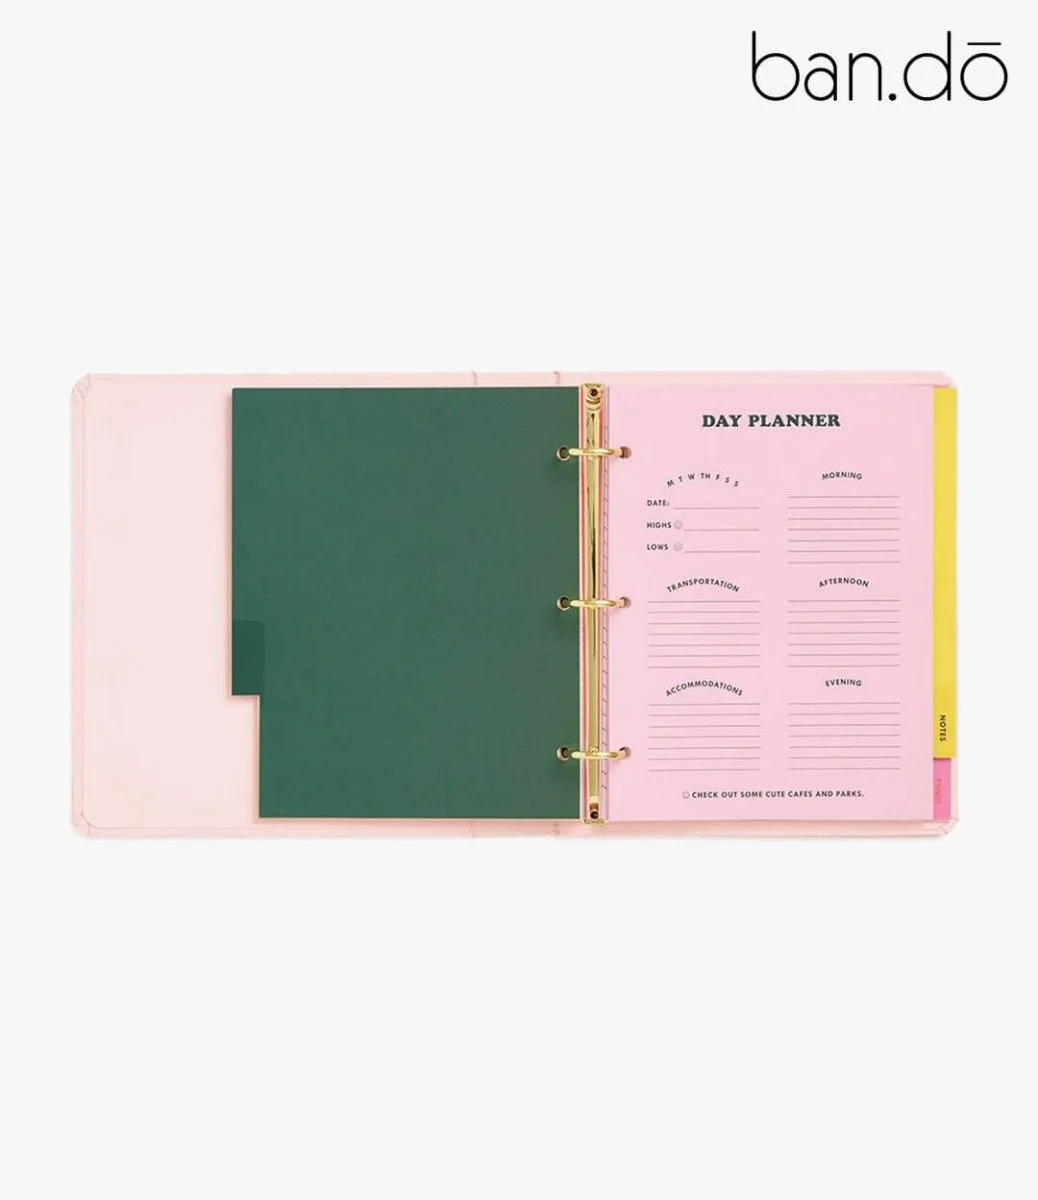 Paradiso Travel Planner by Ban.do